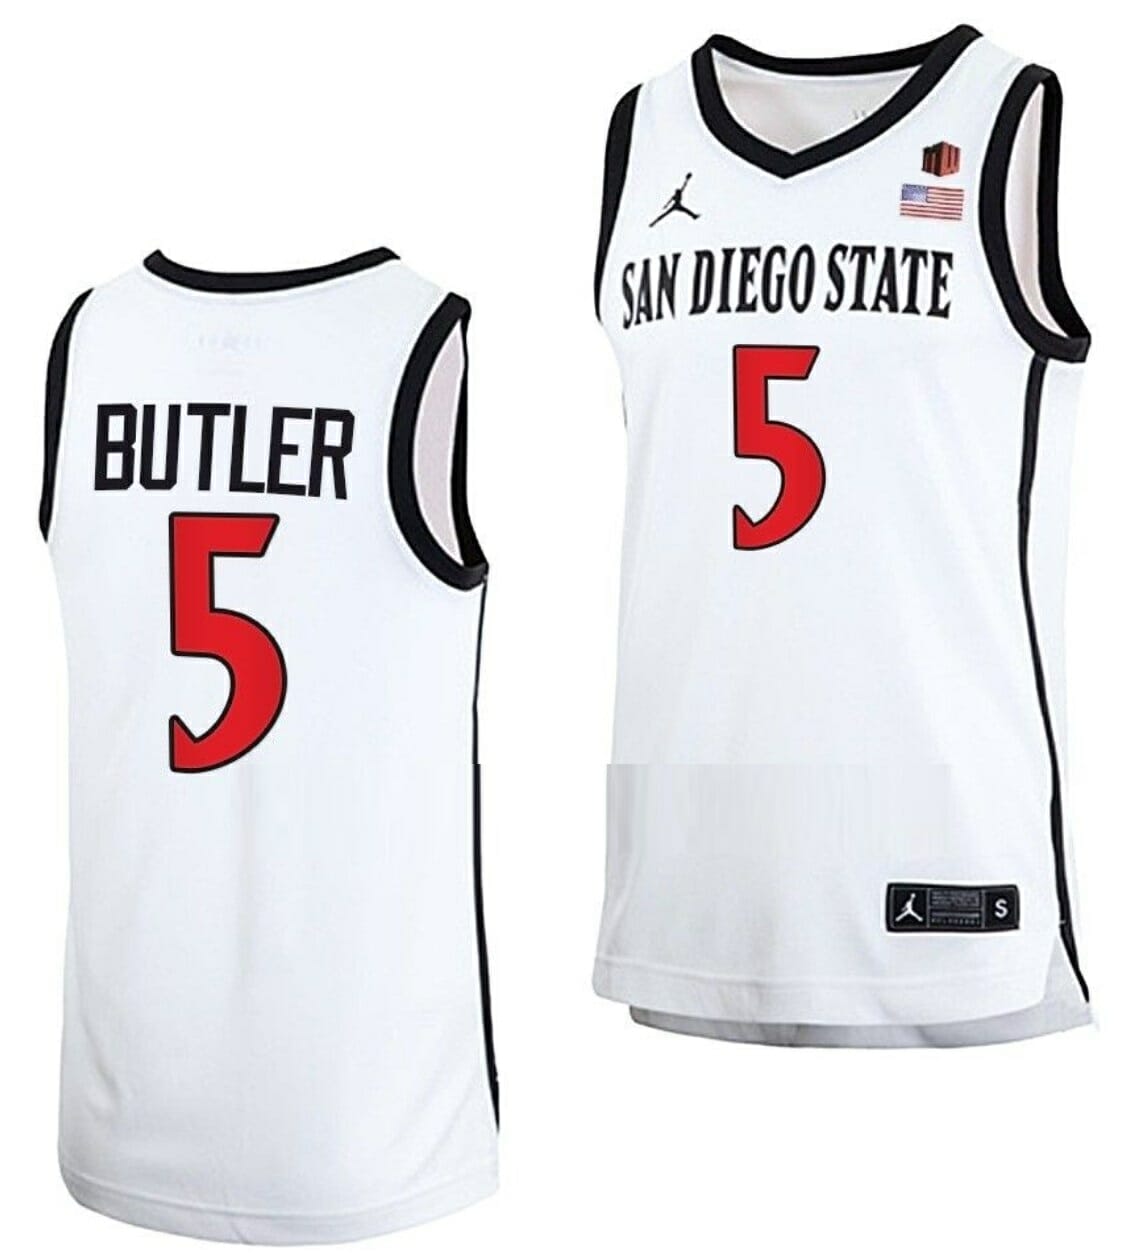 Available] Get New Lamont Butler Jersey Basketball White #5